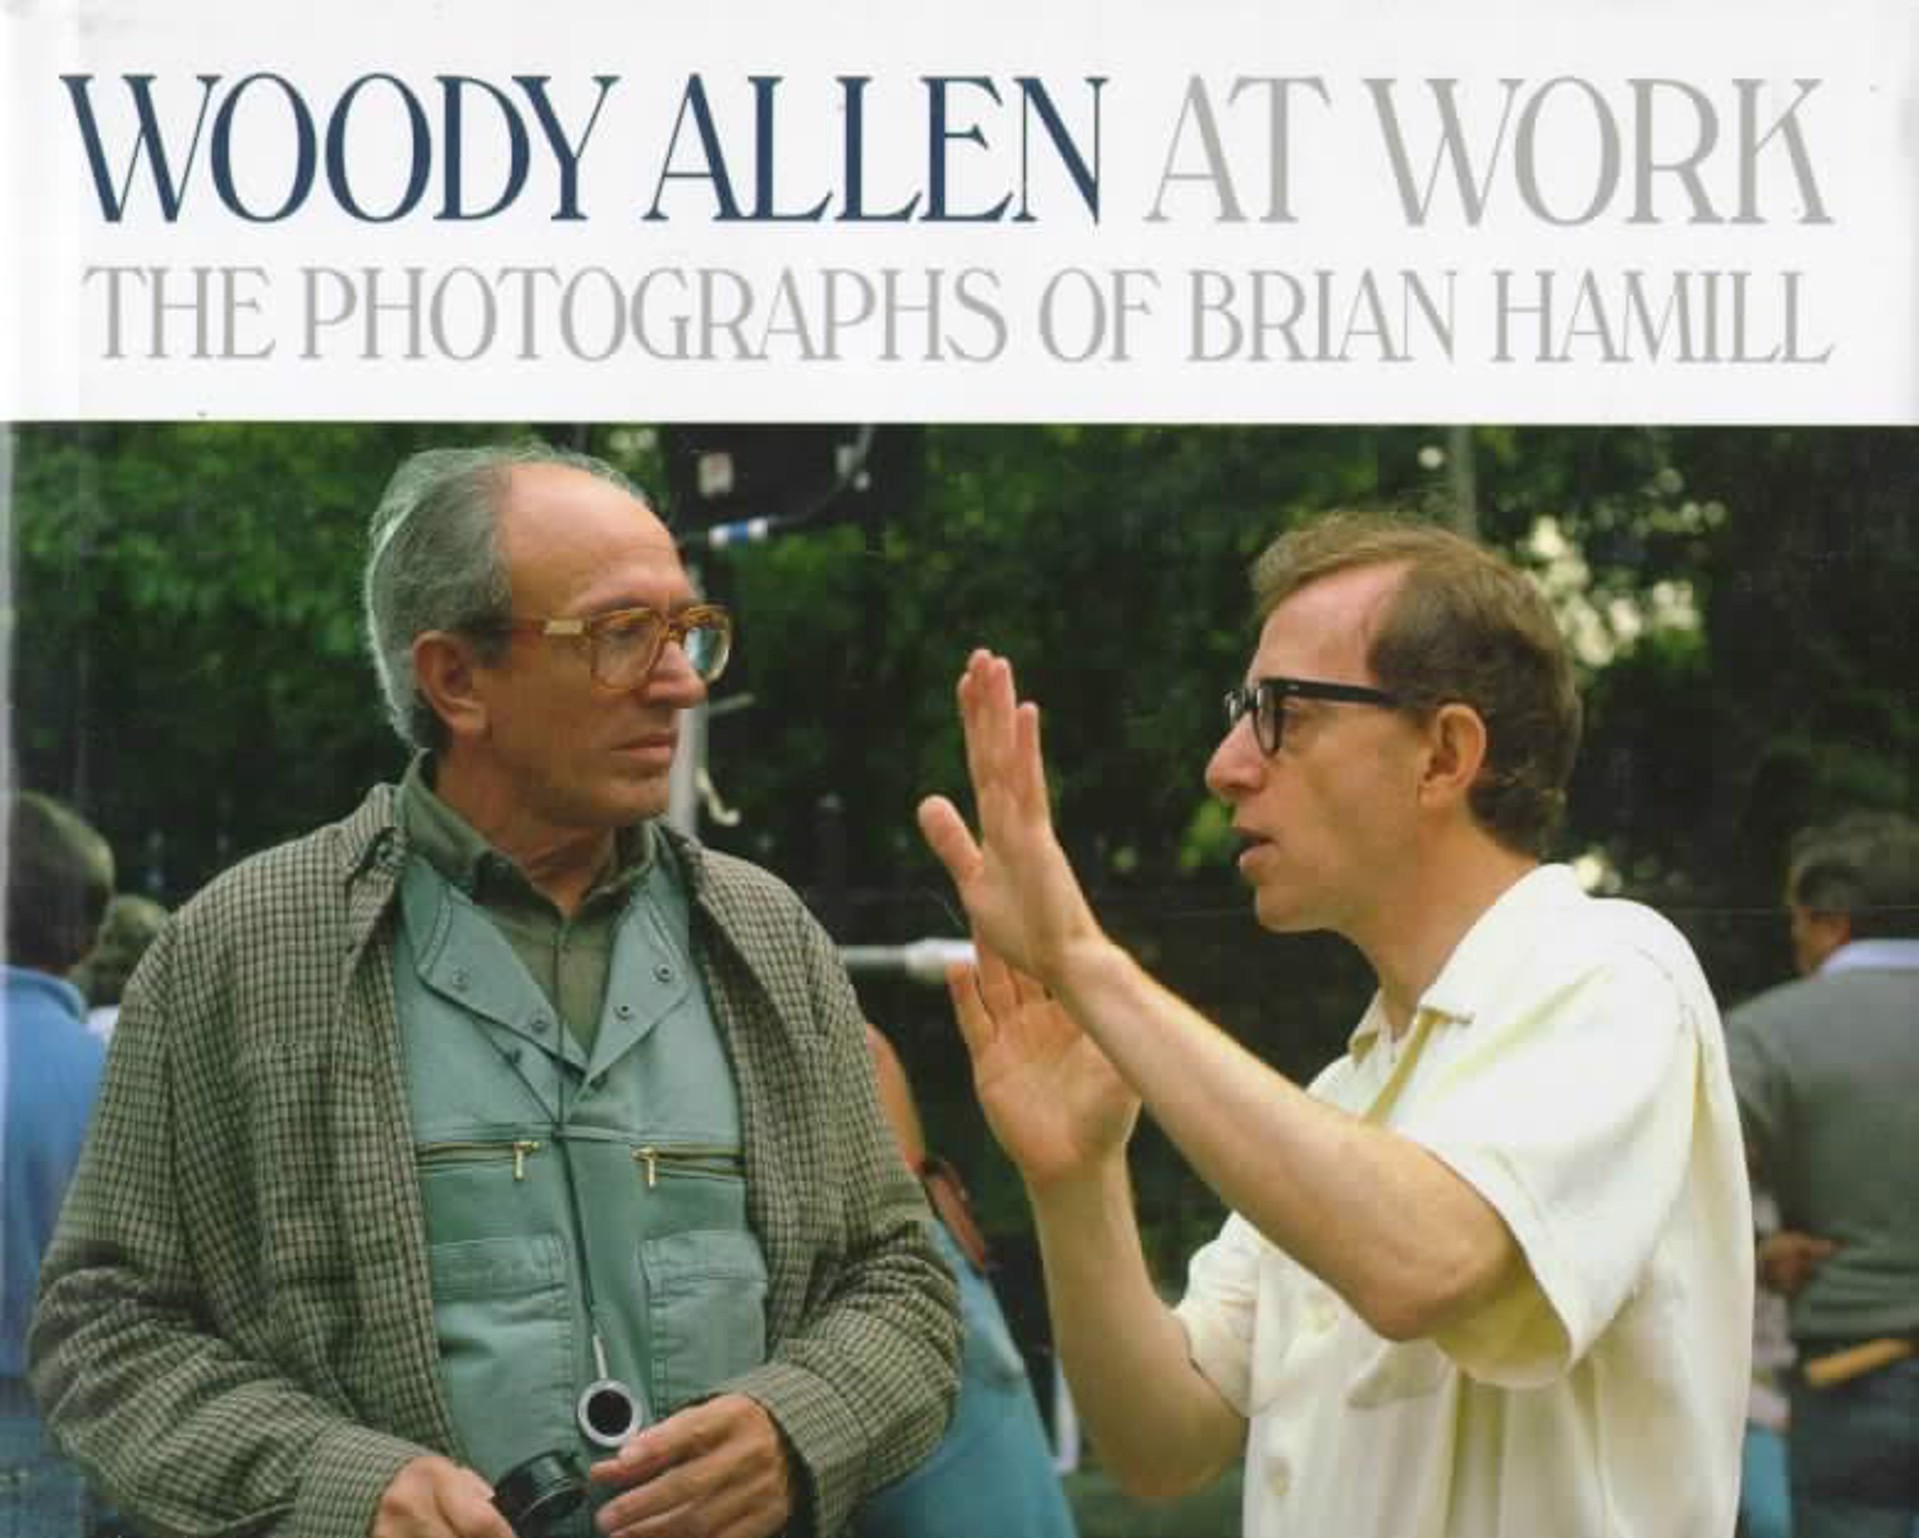 Woody Allen At Work (Photographs of Brian Hamill) by Brian Hamill